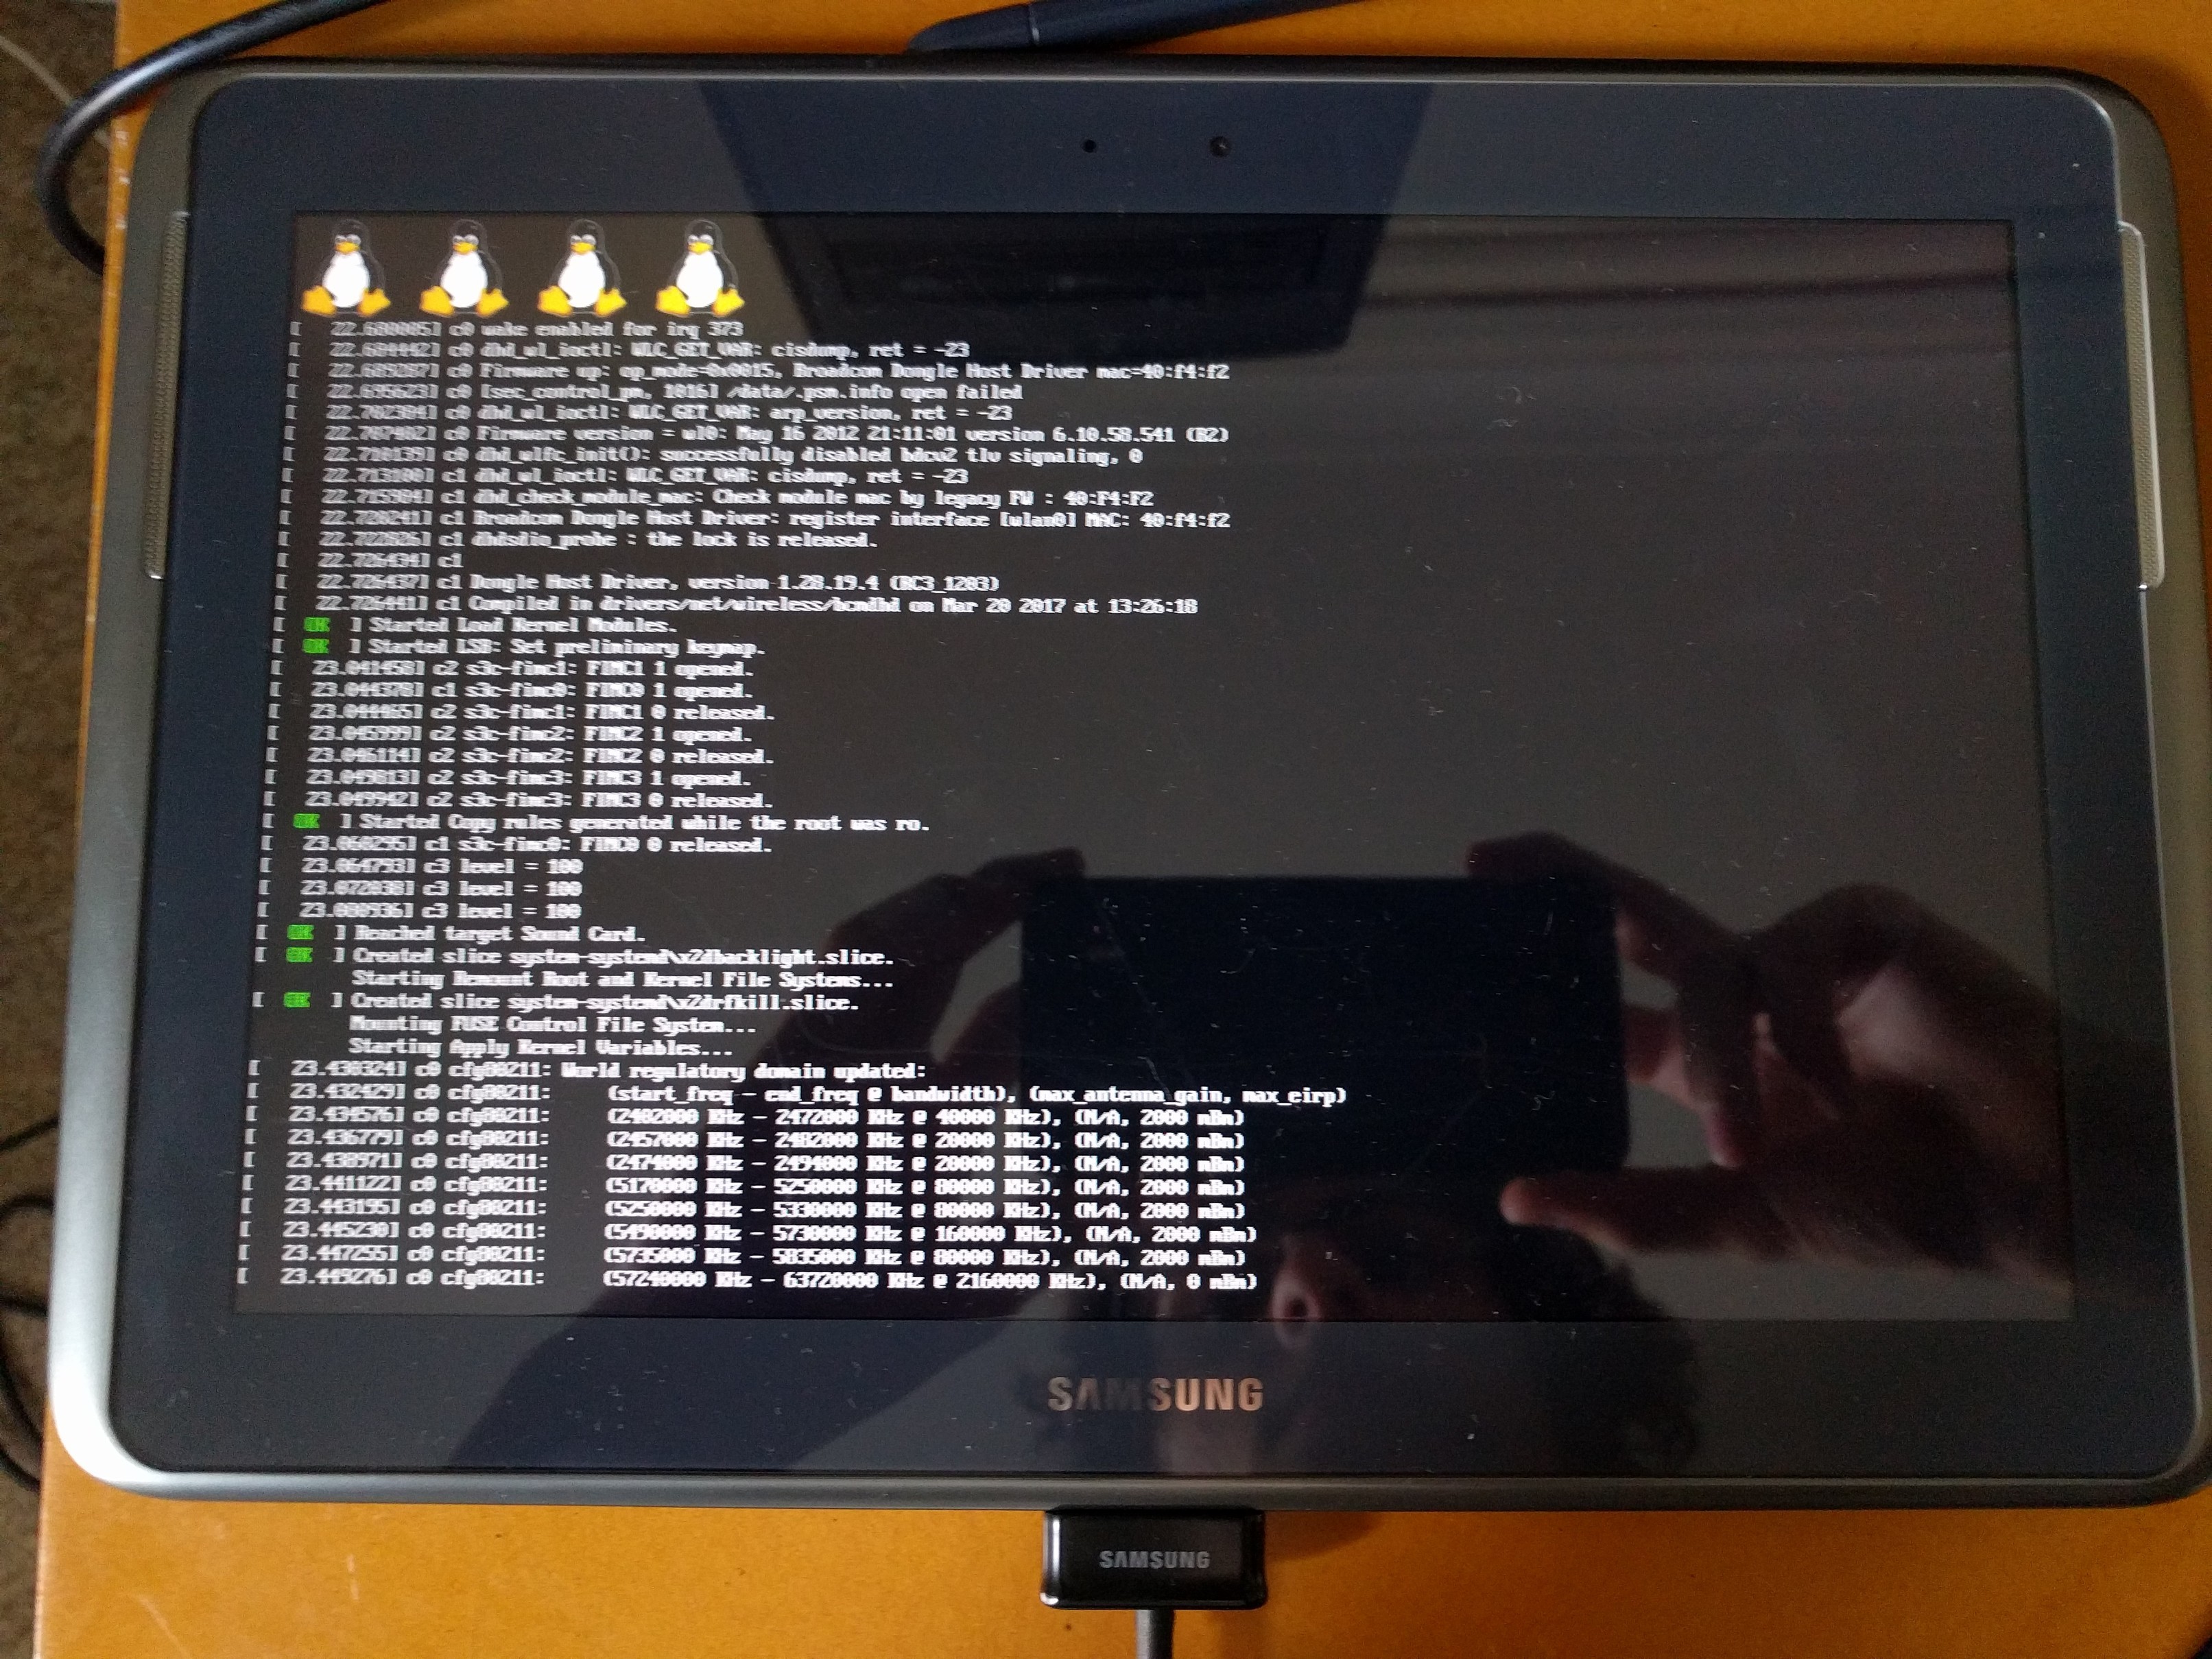 Linux On The Samsung Galaxy Tab 10 1 And You Can Too Wikis